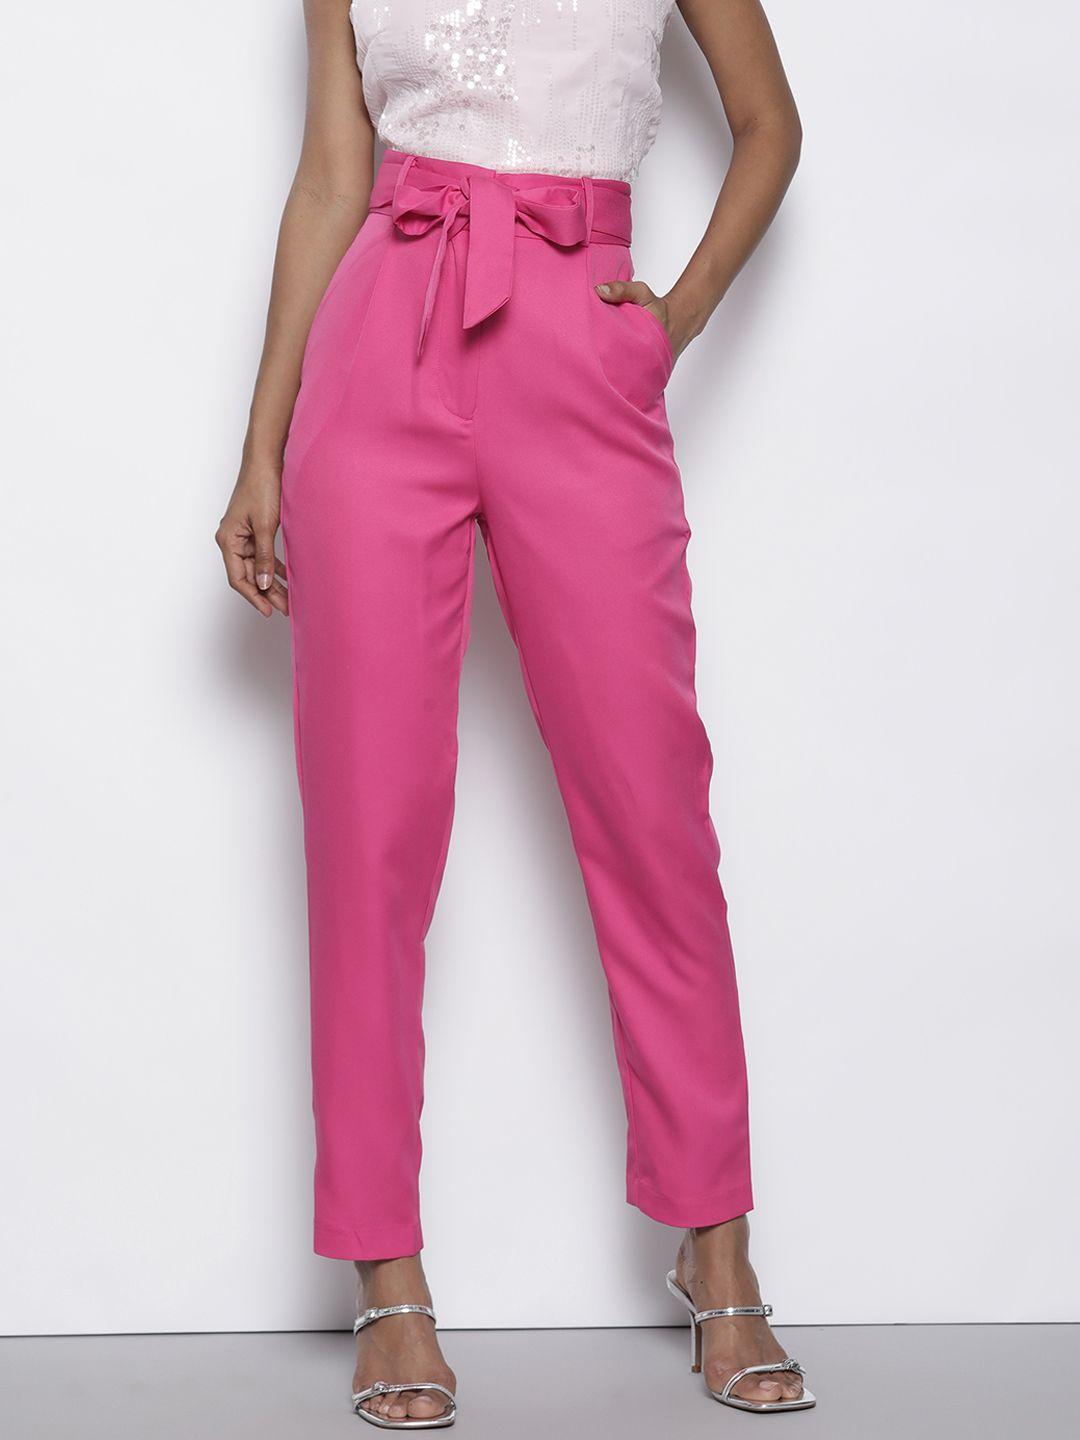 dorothy perkins women slim fit trousers with belt